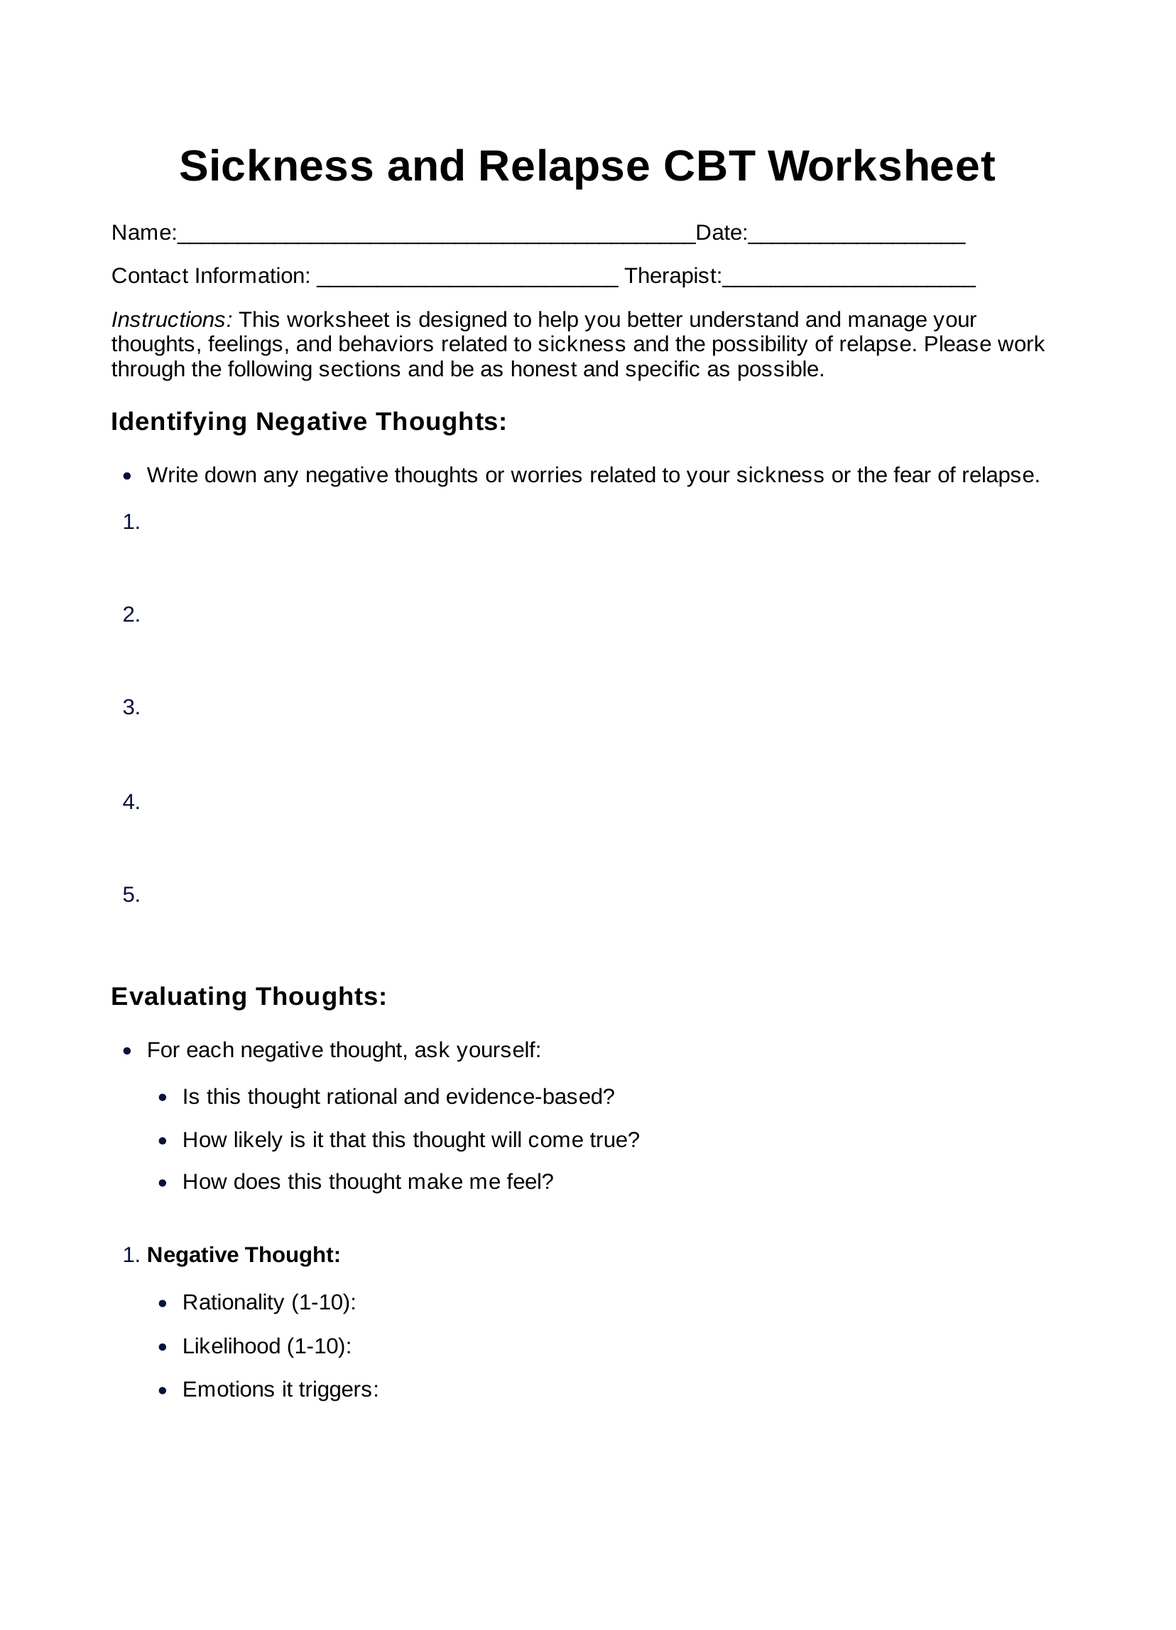 Sickness and Relapse CBT Worksheet PDF Example